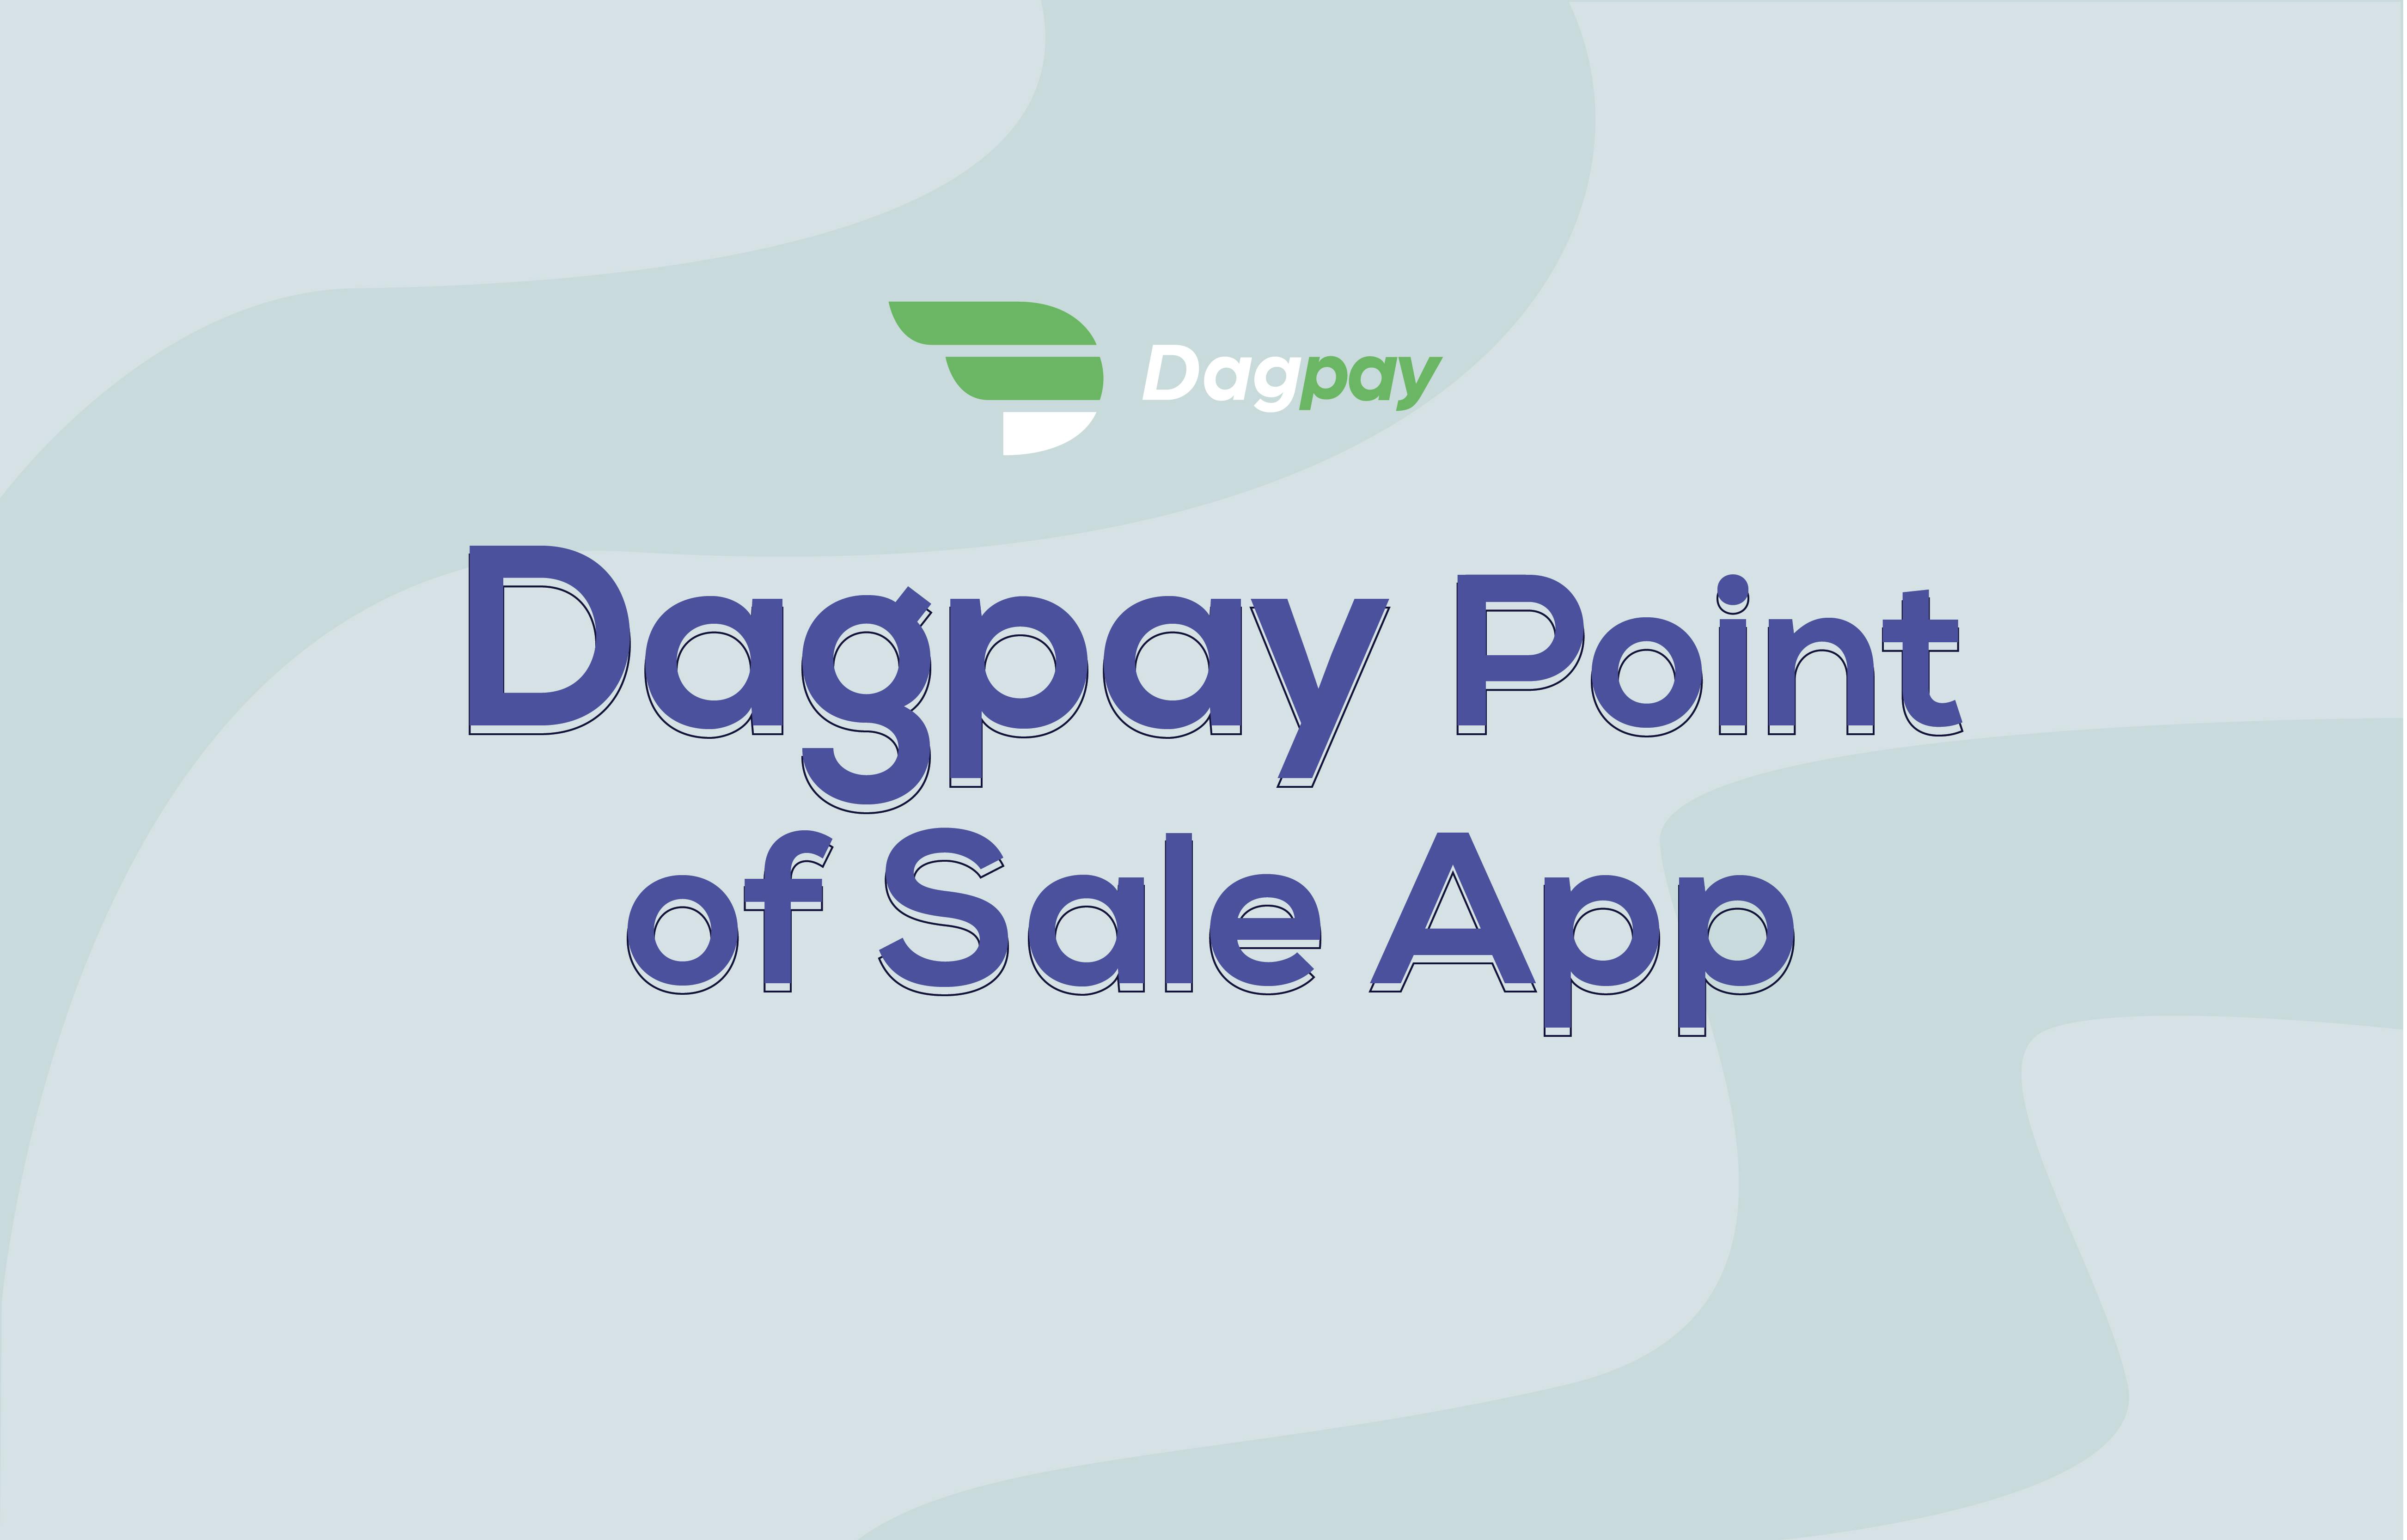 The Dagpay Point of Sale App is Here!